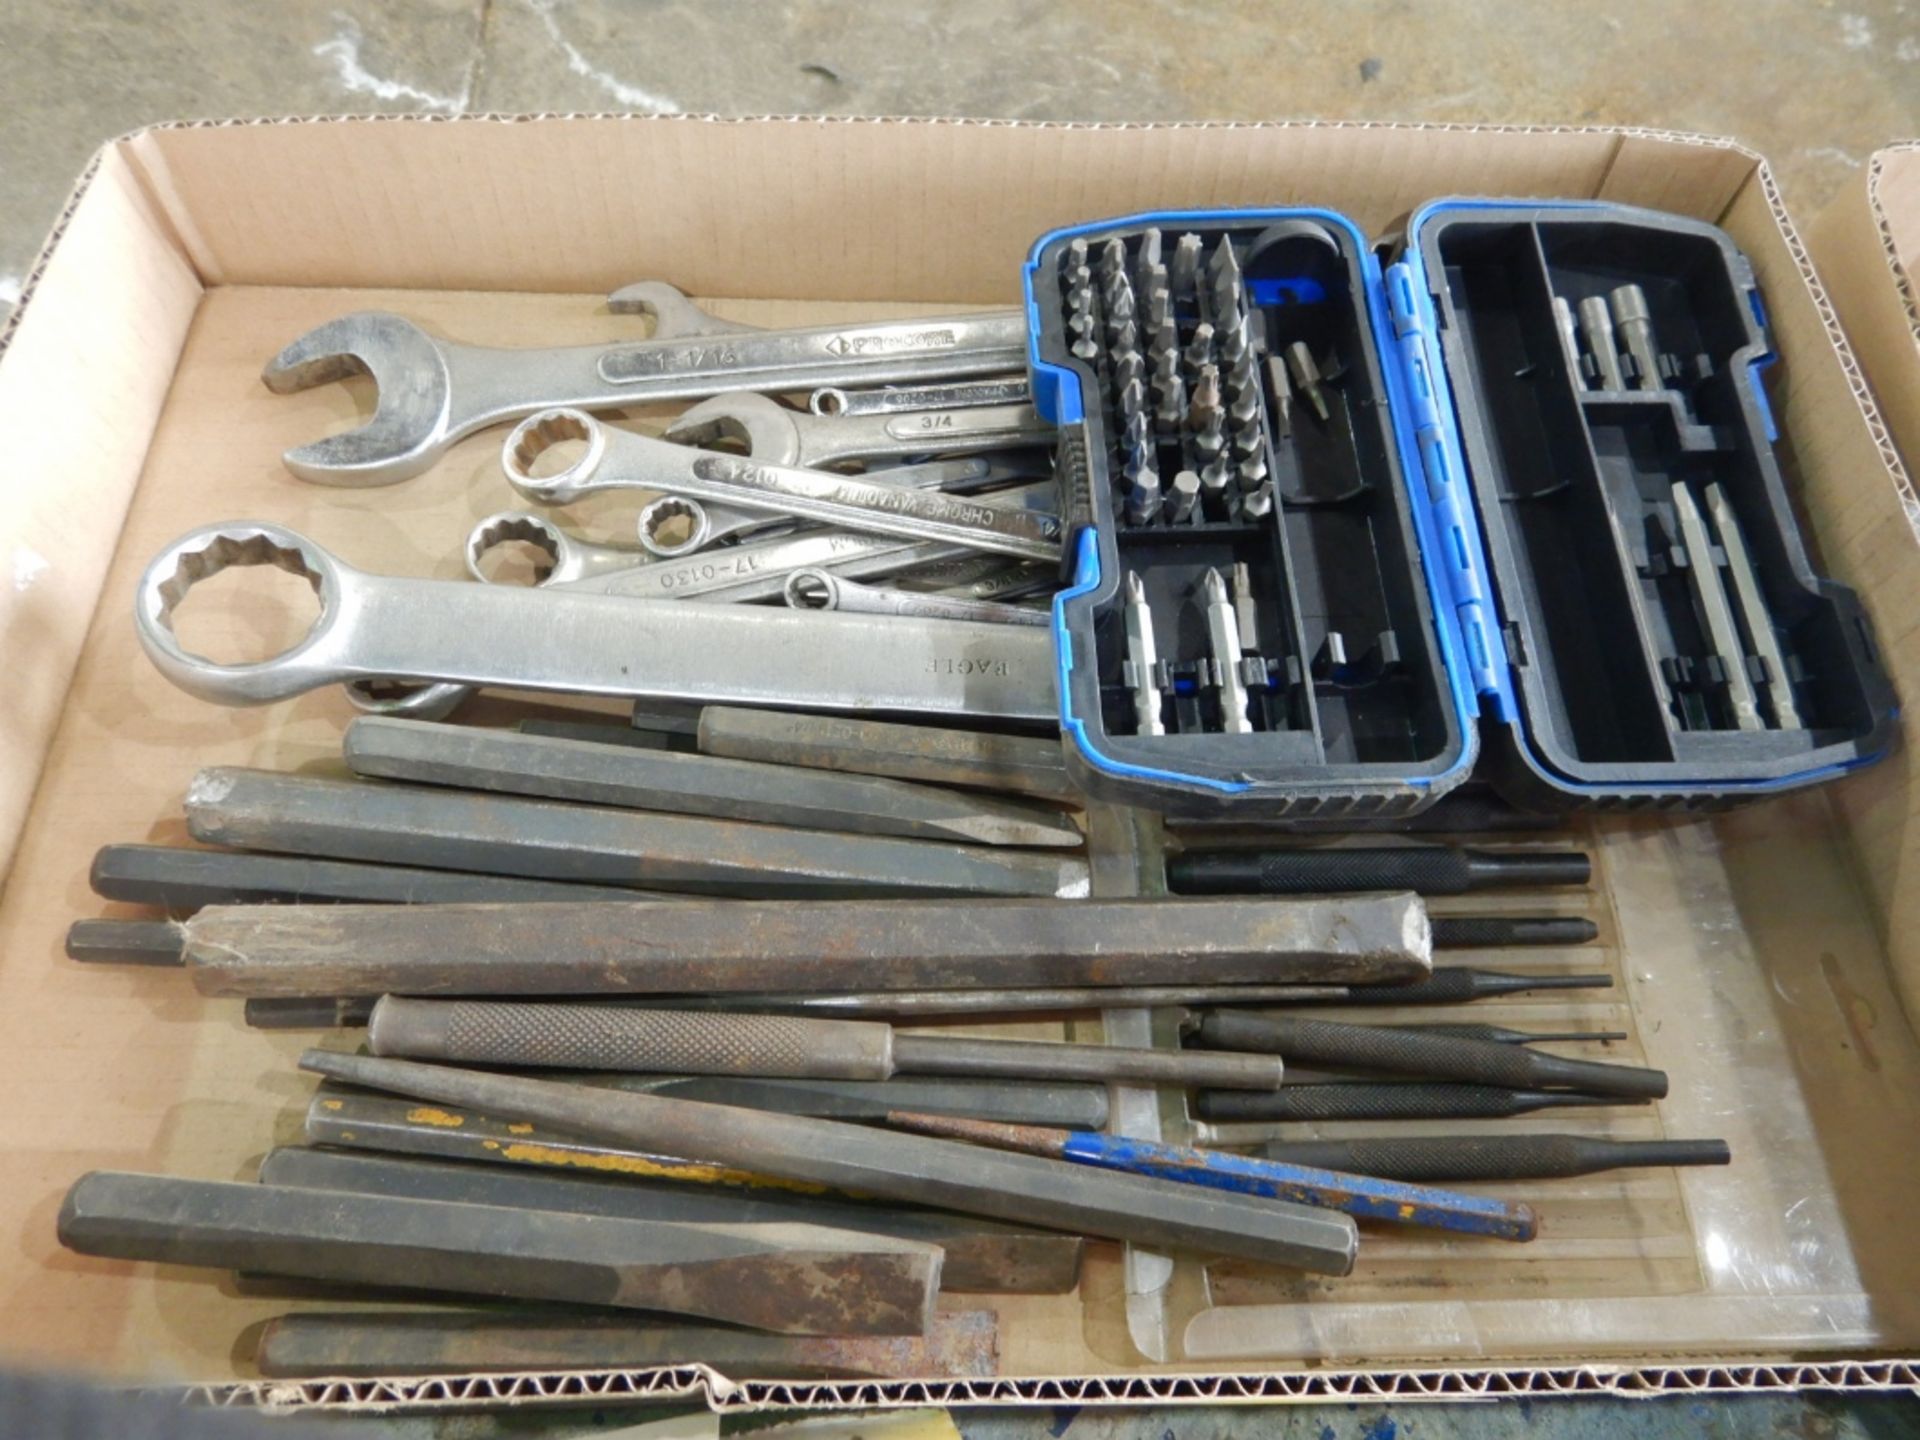 L/O PUNCHES & CHISELS, COMBINATION WRENCHES, SCREW DRIVERS, DRIVE ASSORTMENT KIT, ETC - Image 2 of 3